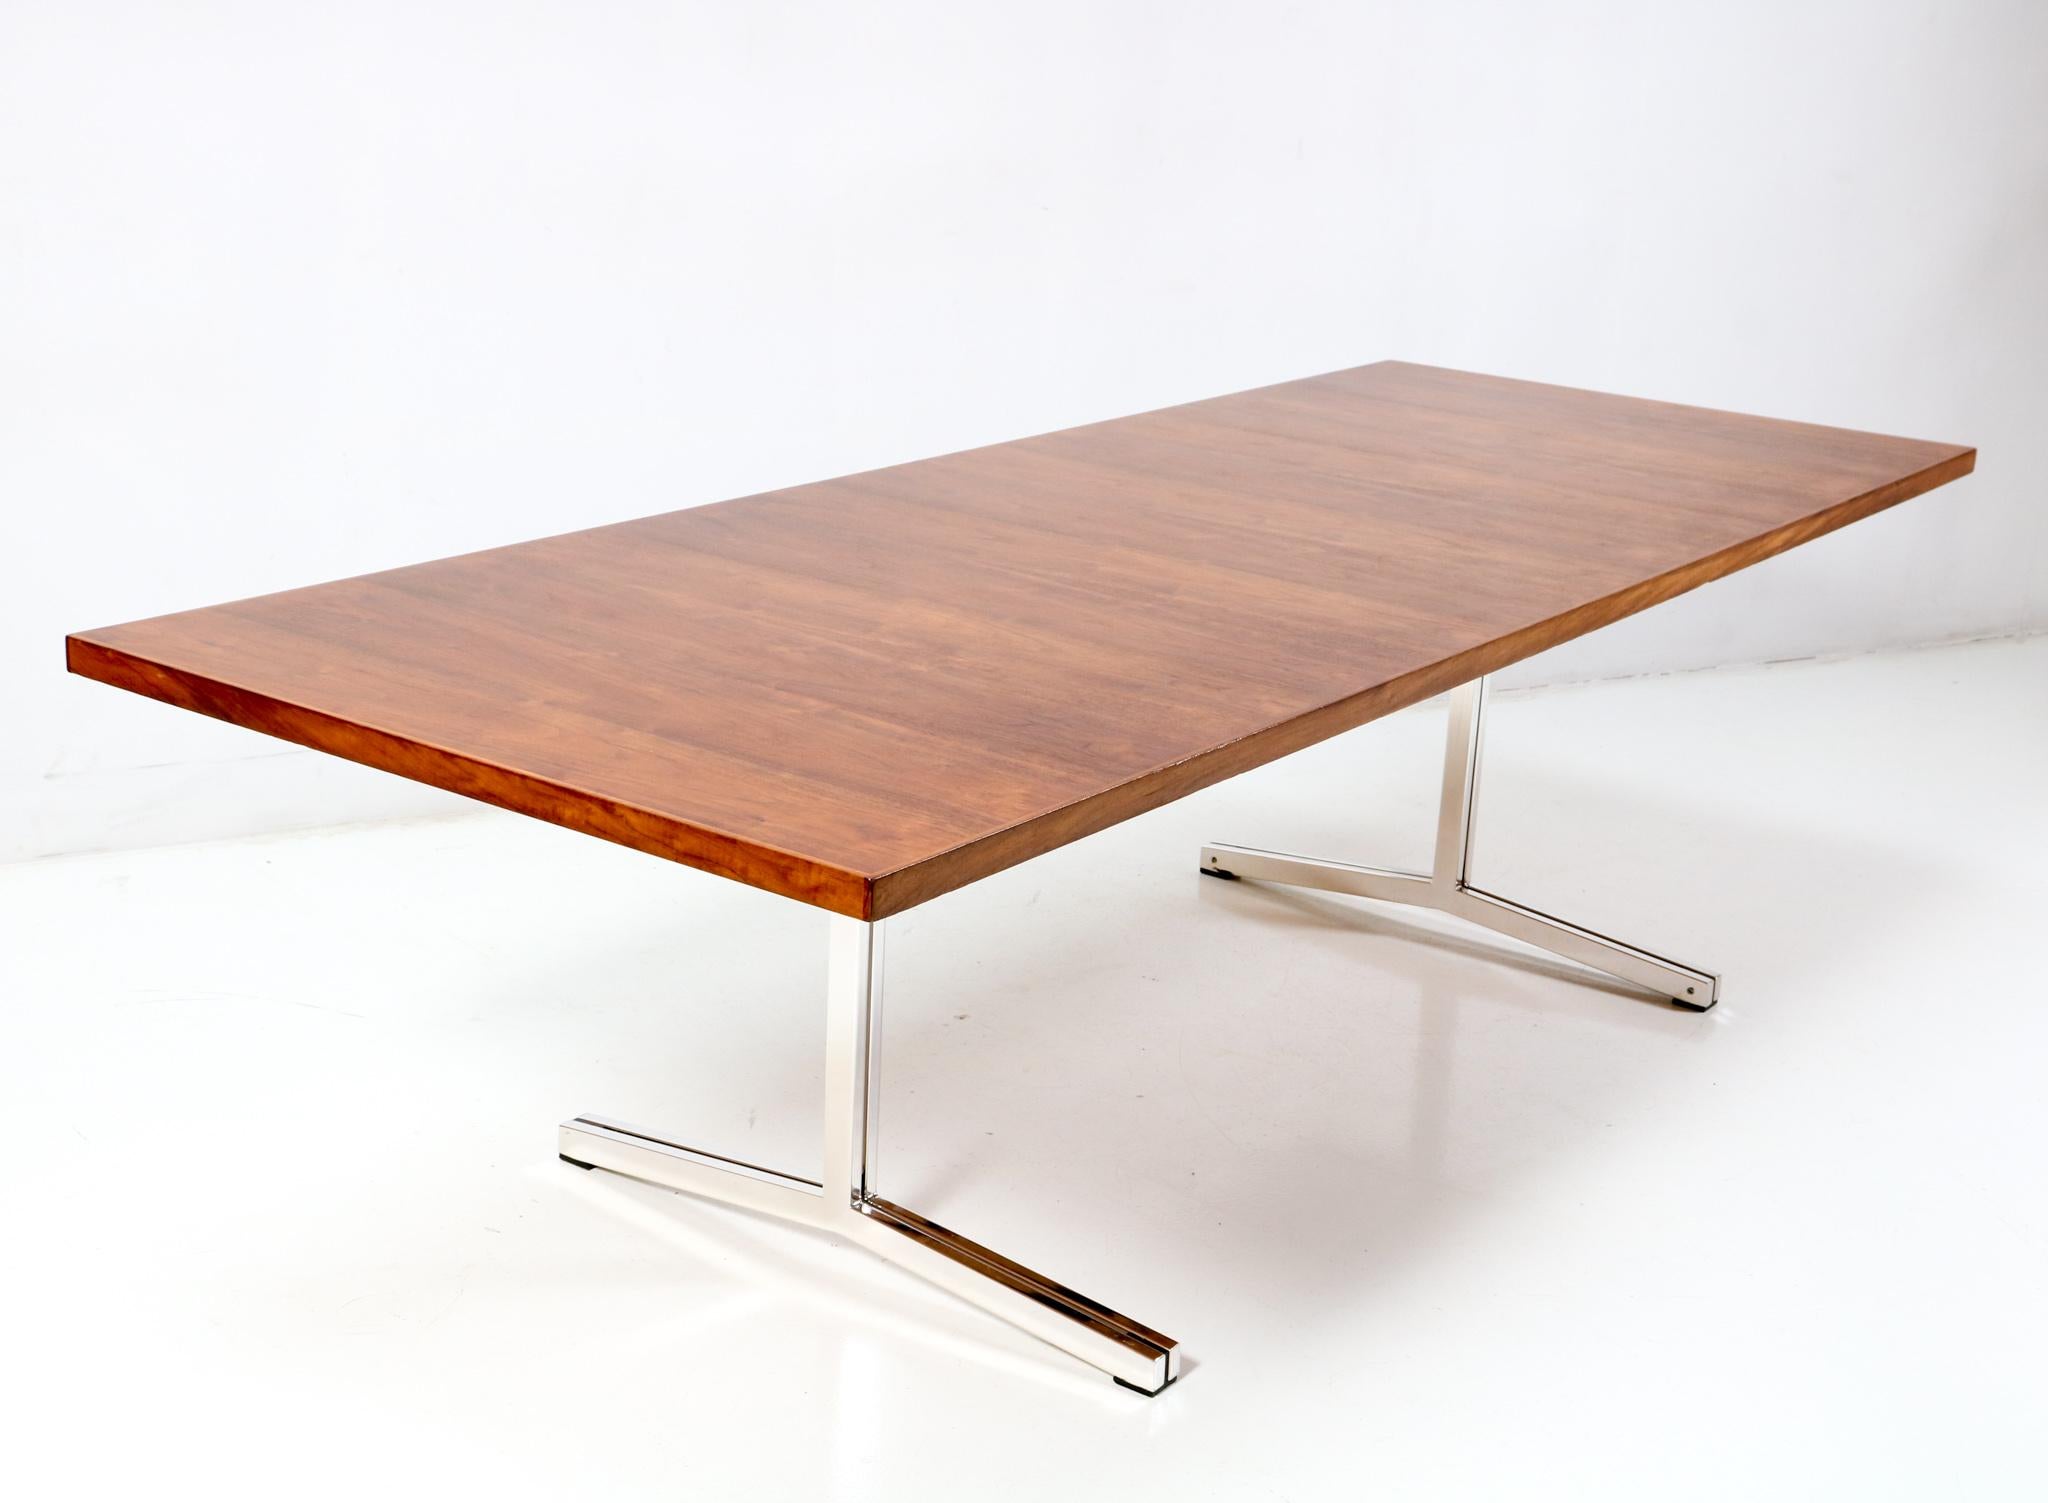 Magnificent and large Mid-Century Modern conference table or dining room table.
Design by Theo Tempelman for AP Originals.
Striking Dutch design from the 1960s.
Original re-chromed plated metal frame with original teak veneered top.
This wonderful